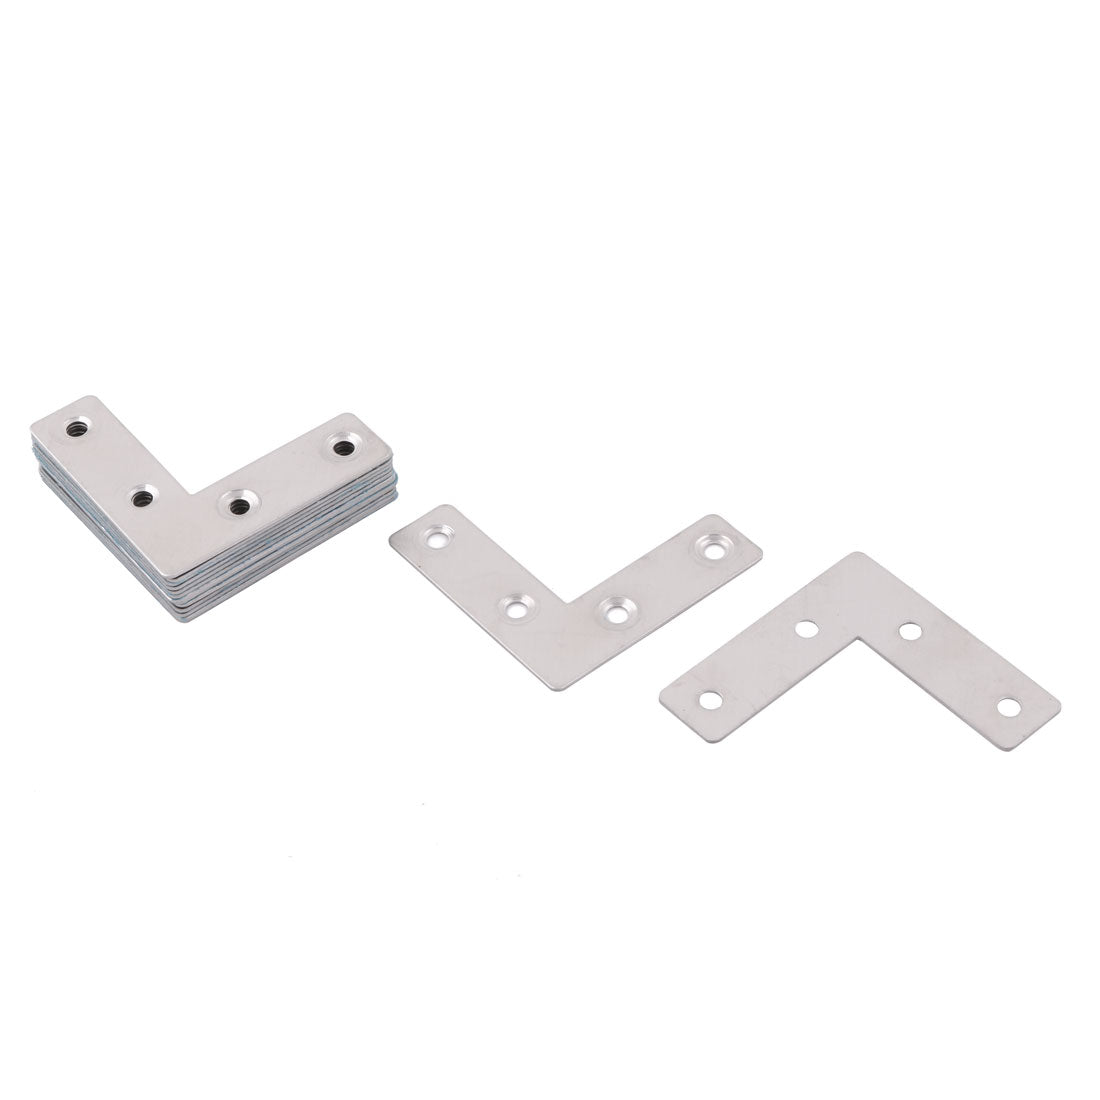 uxcell Uxcell Stainless Steel Fixing Corner Brace Joint Angle Bracket Shelf Silver Tone 40 x 40 x 1mm 4 Pcs